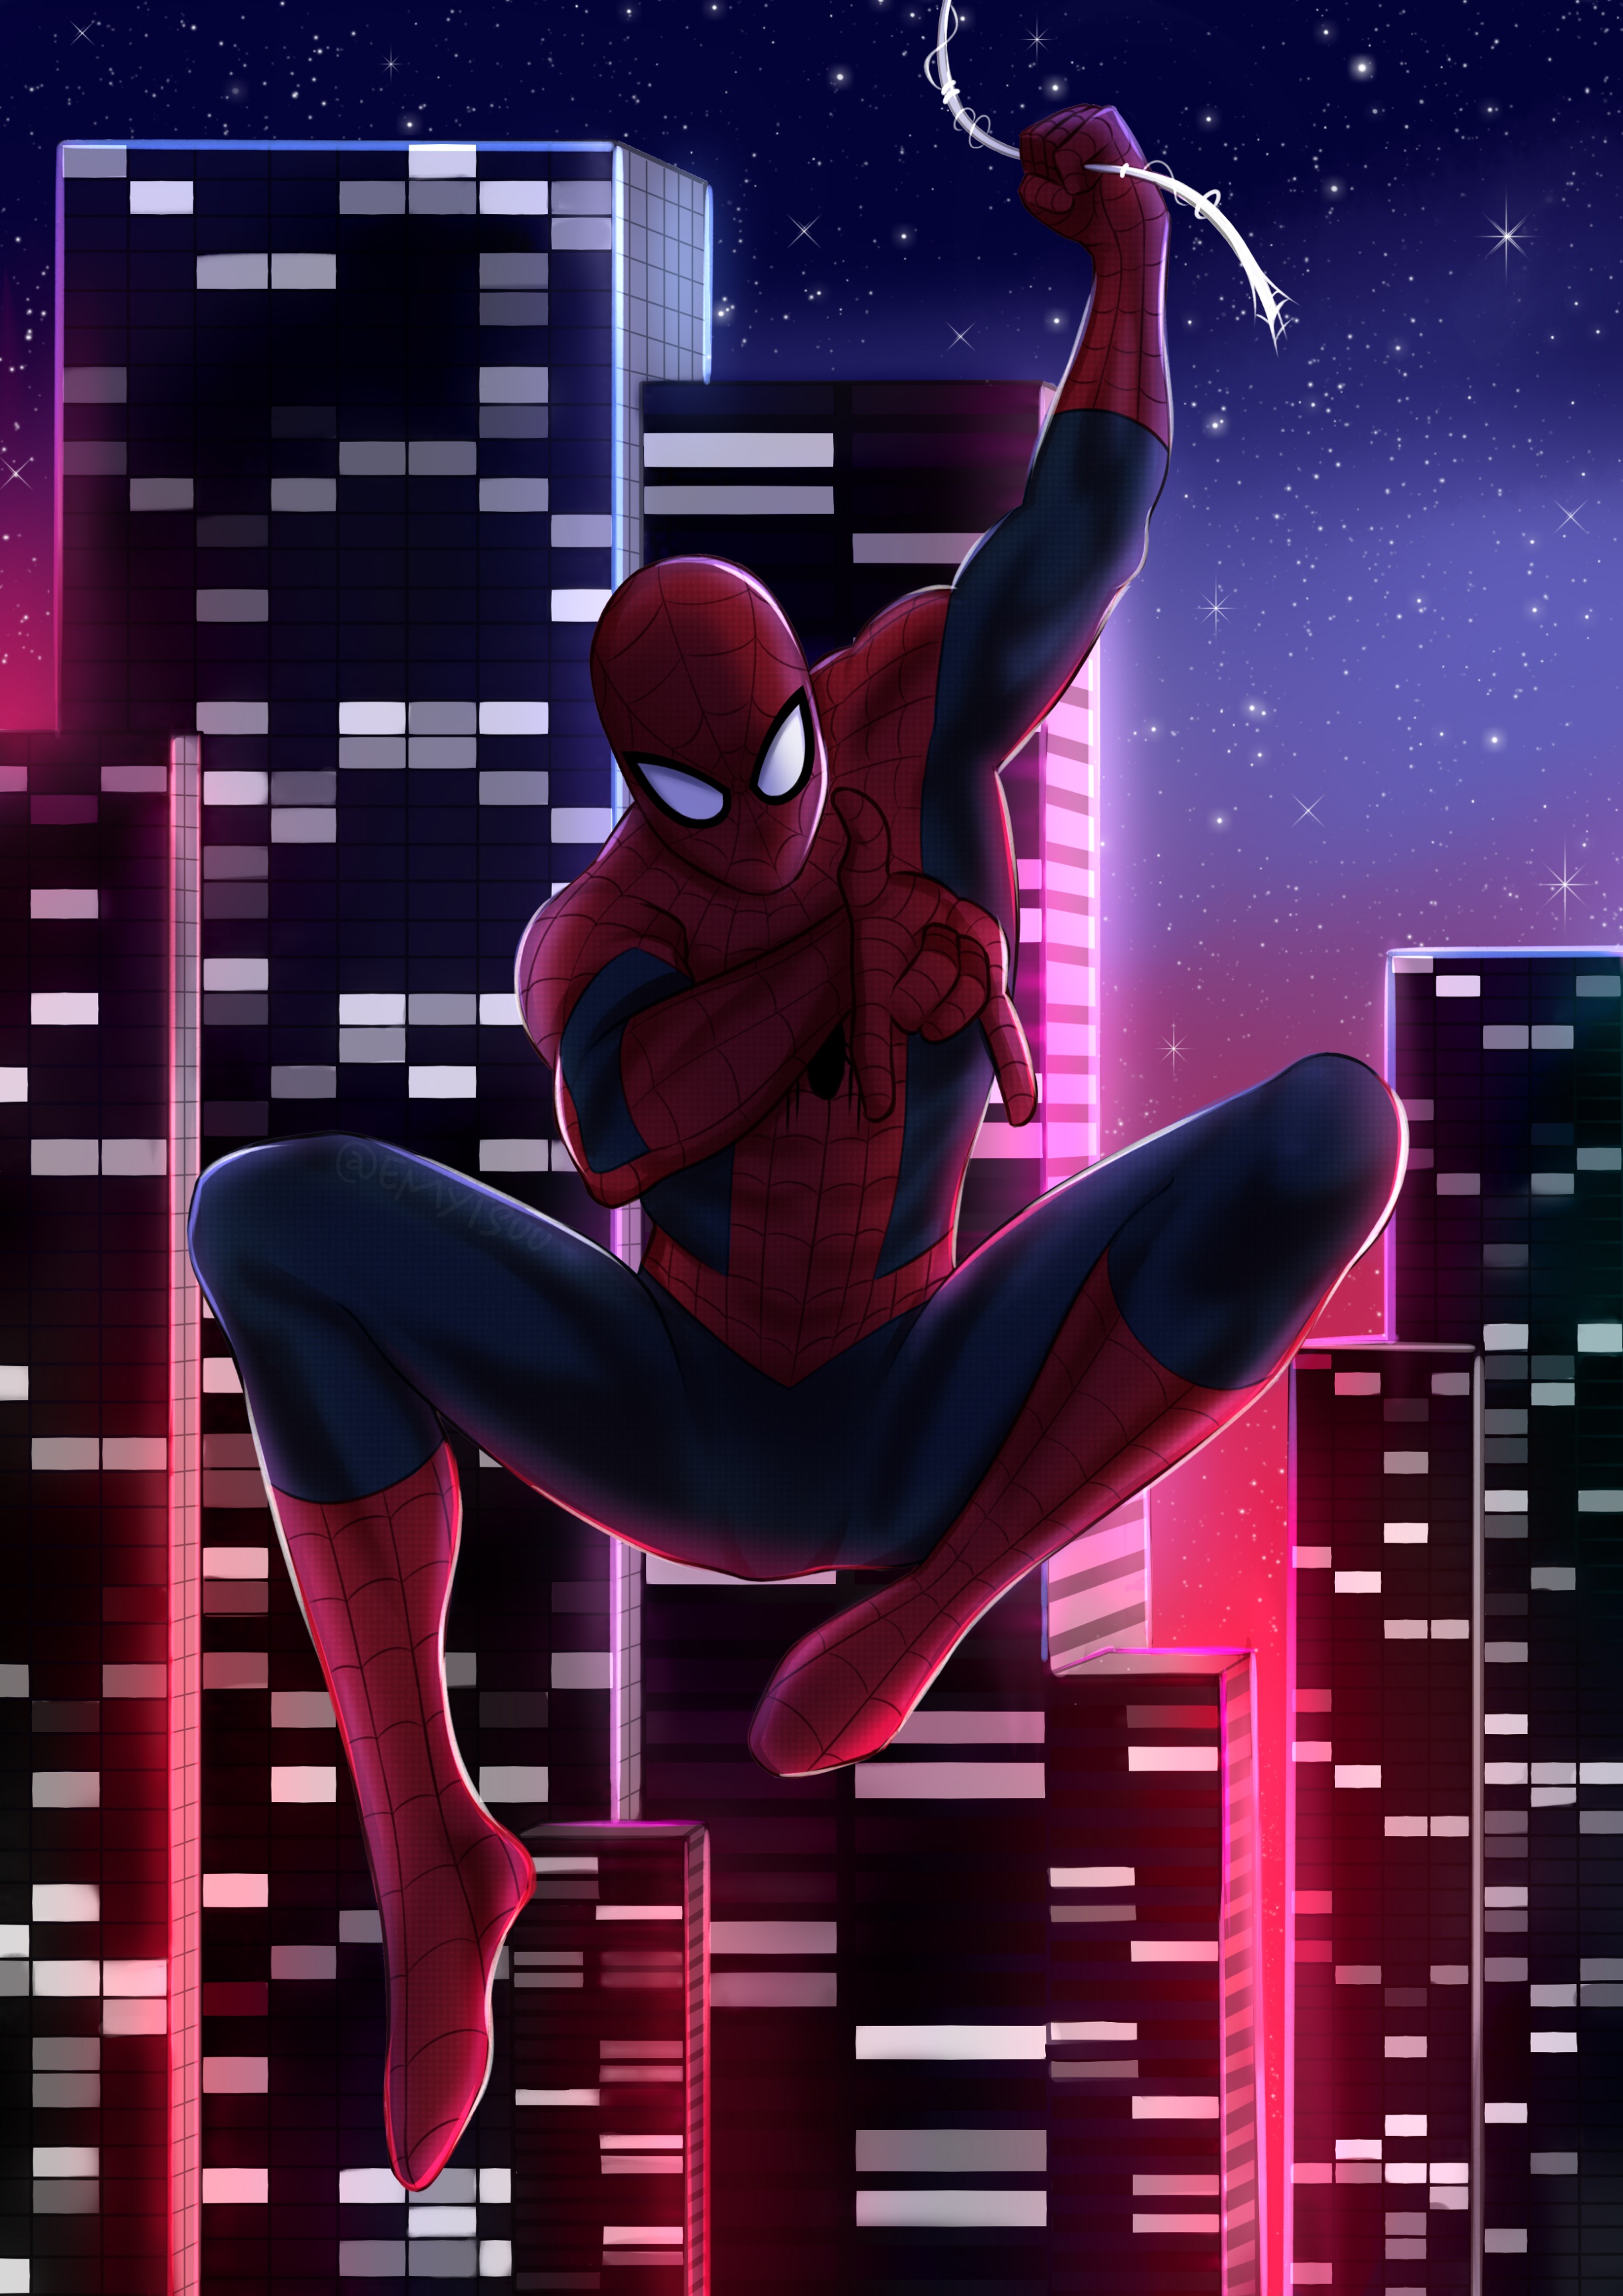 City of Spiders: Spiderman by Emytsuu on DeviantArt